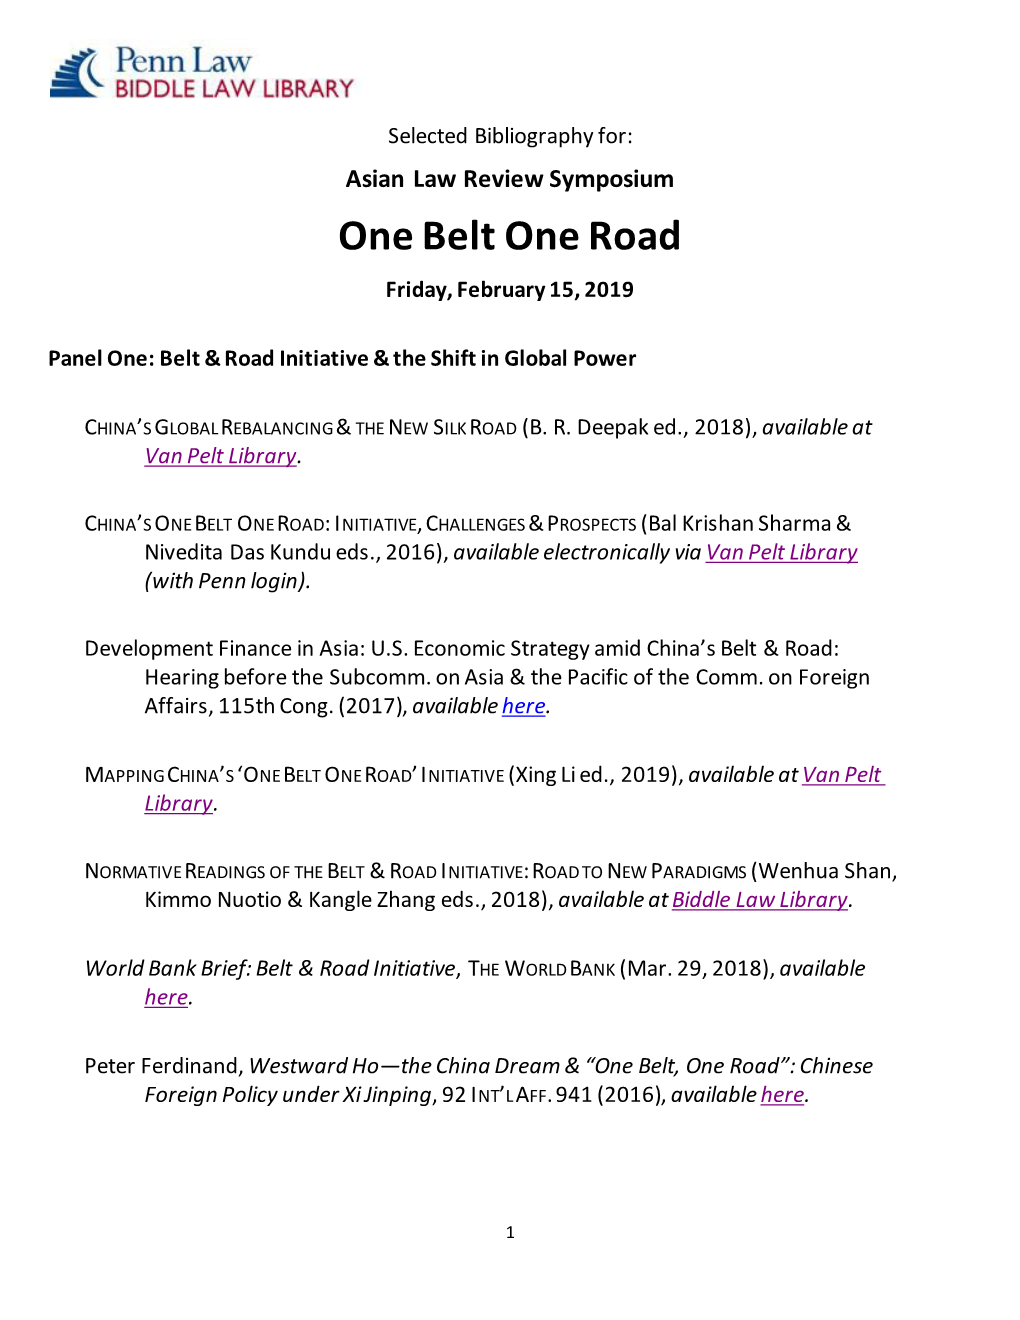 Asian Law Review Symposium: "One Belt One Road: Global China Amid the Wave of Anti-Globalization": Selected Bibliograp